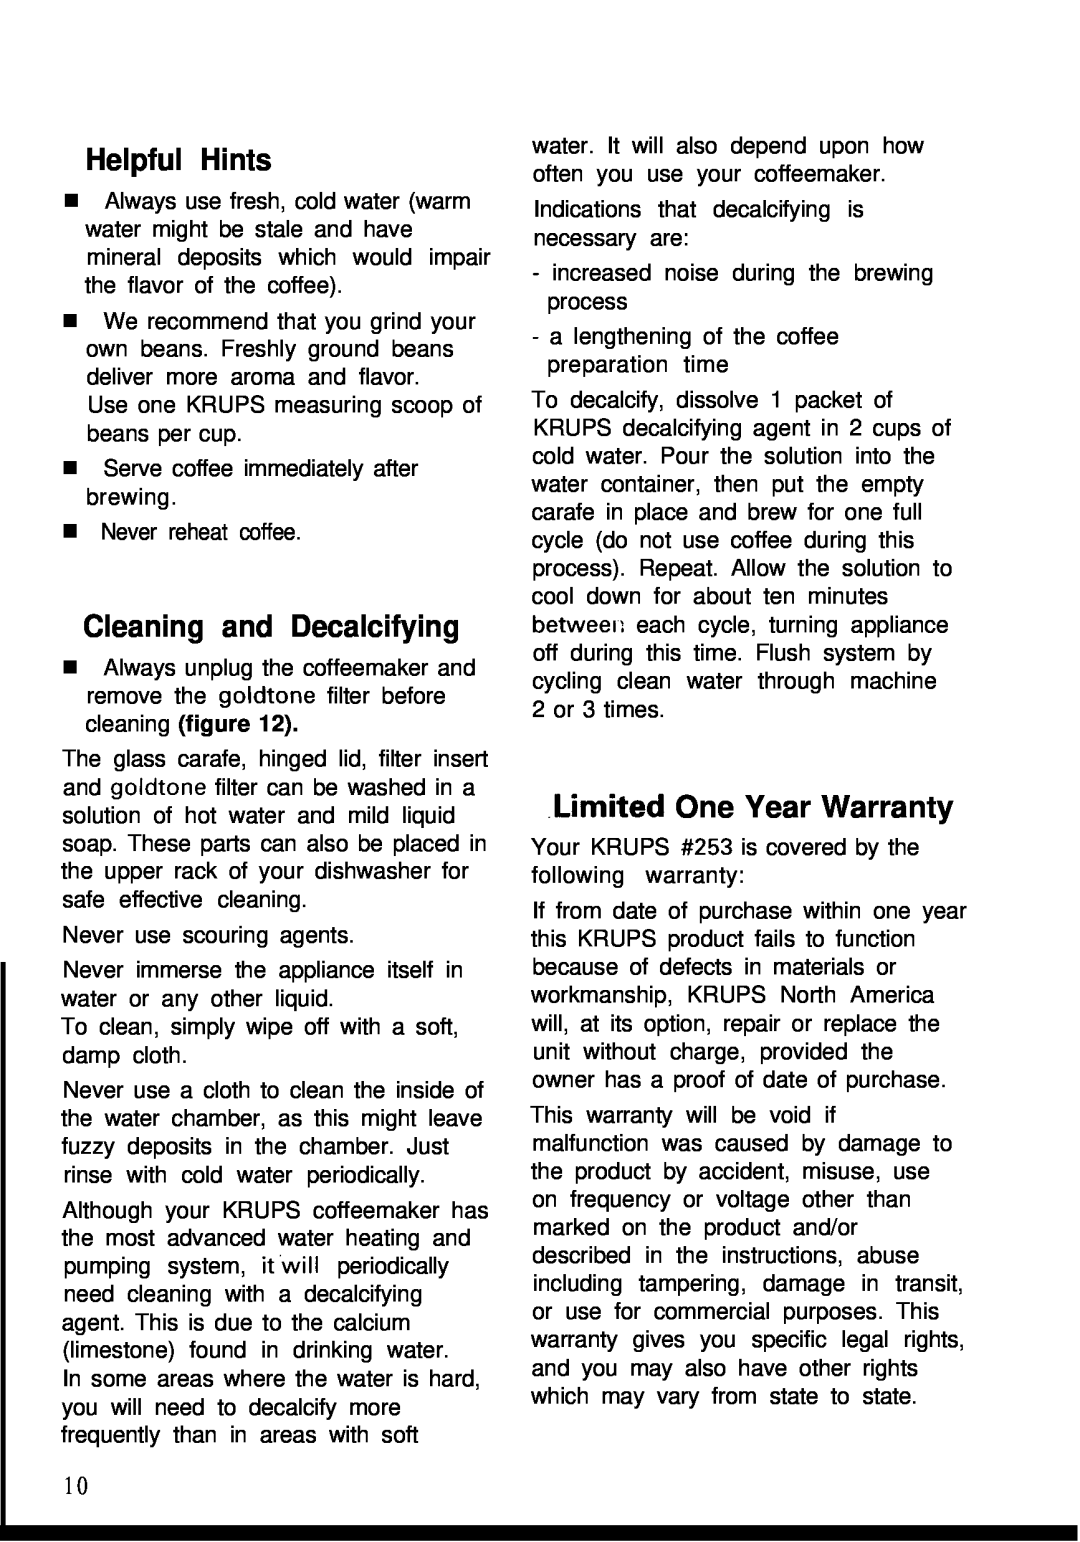 KitchenAid 253 warranty Helpful Hints, Cleaning and Decalcifying, Limited One Year Warranty 